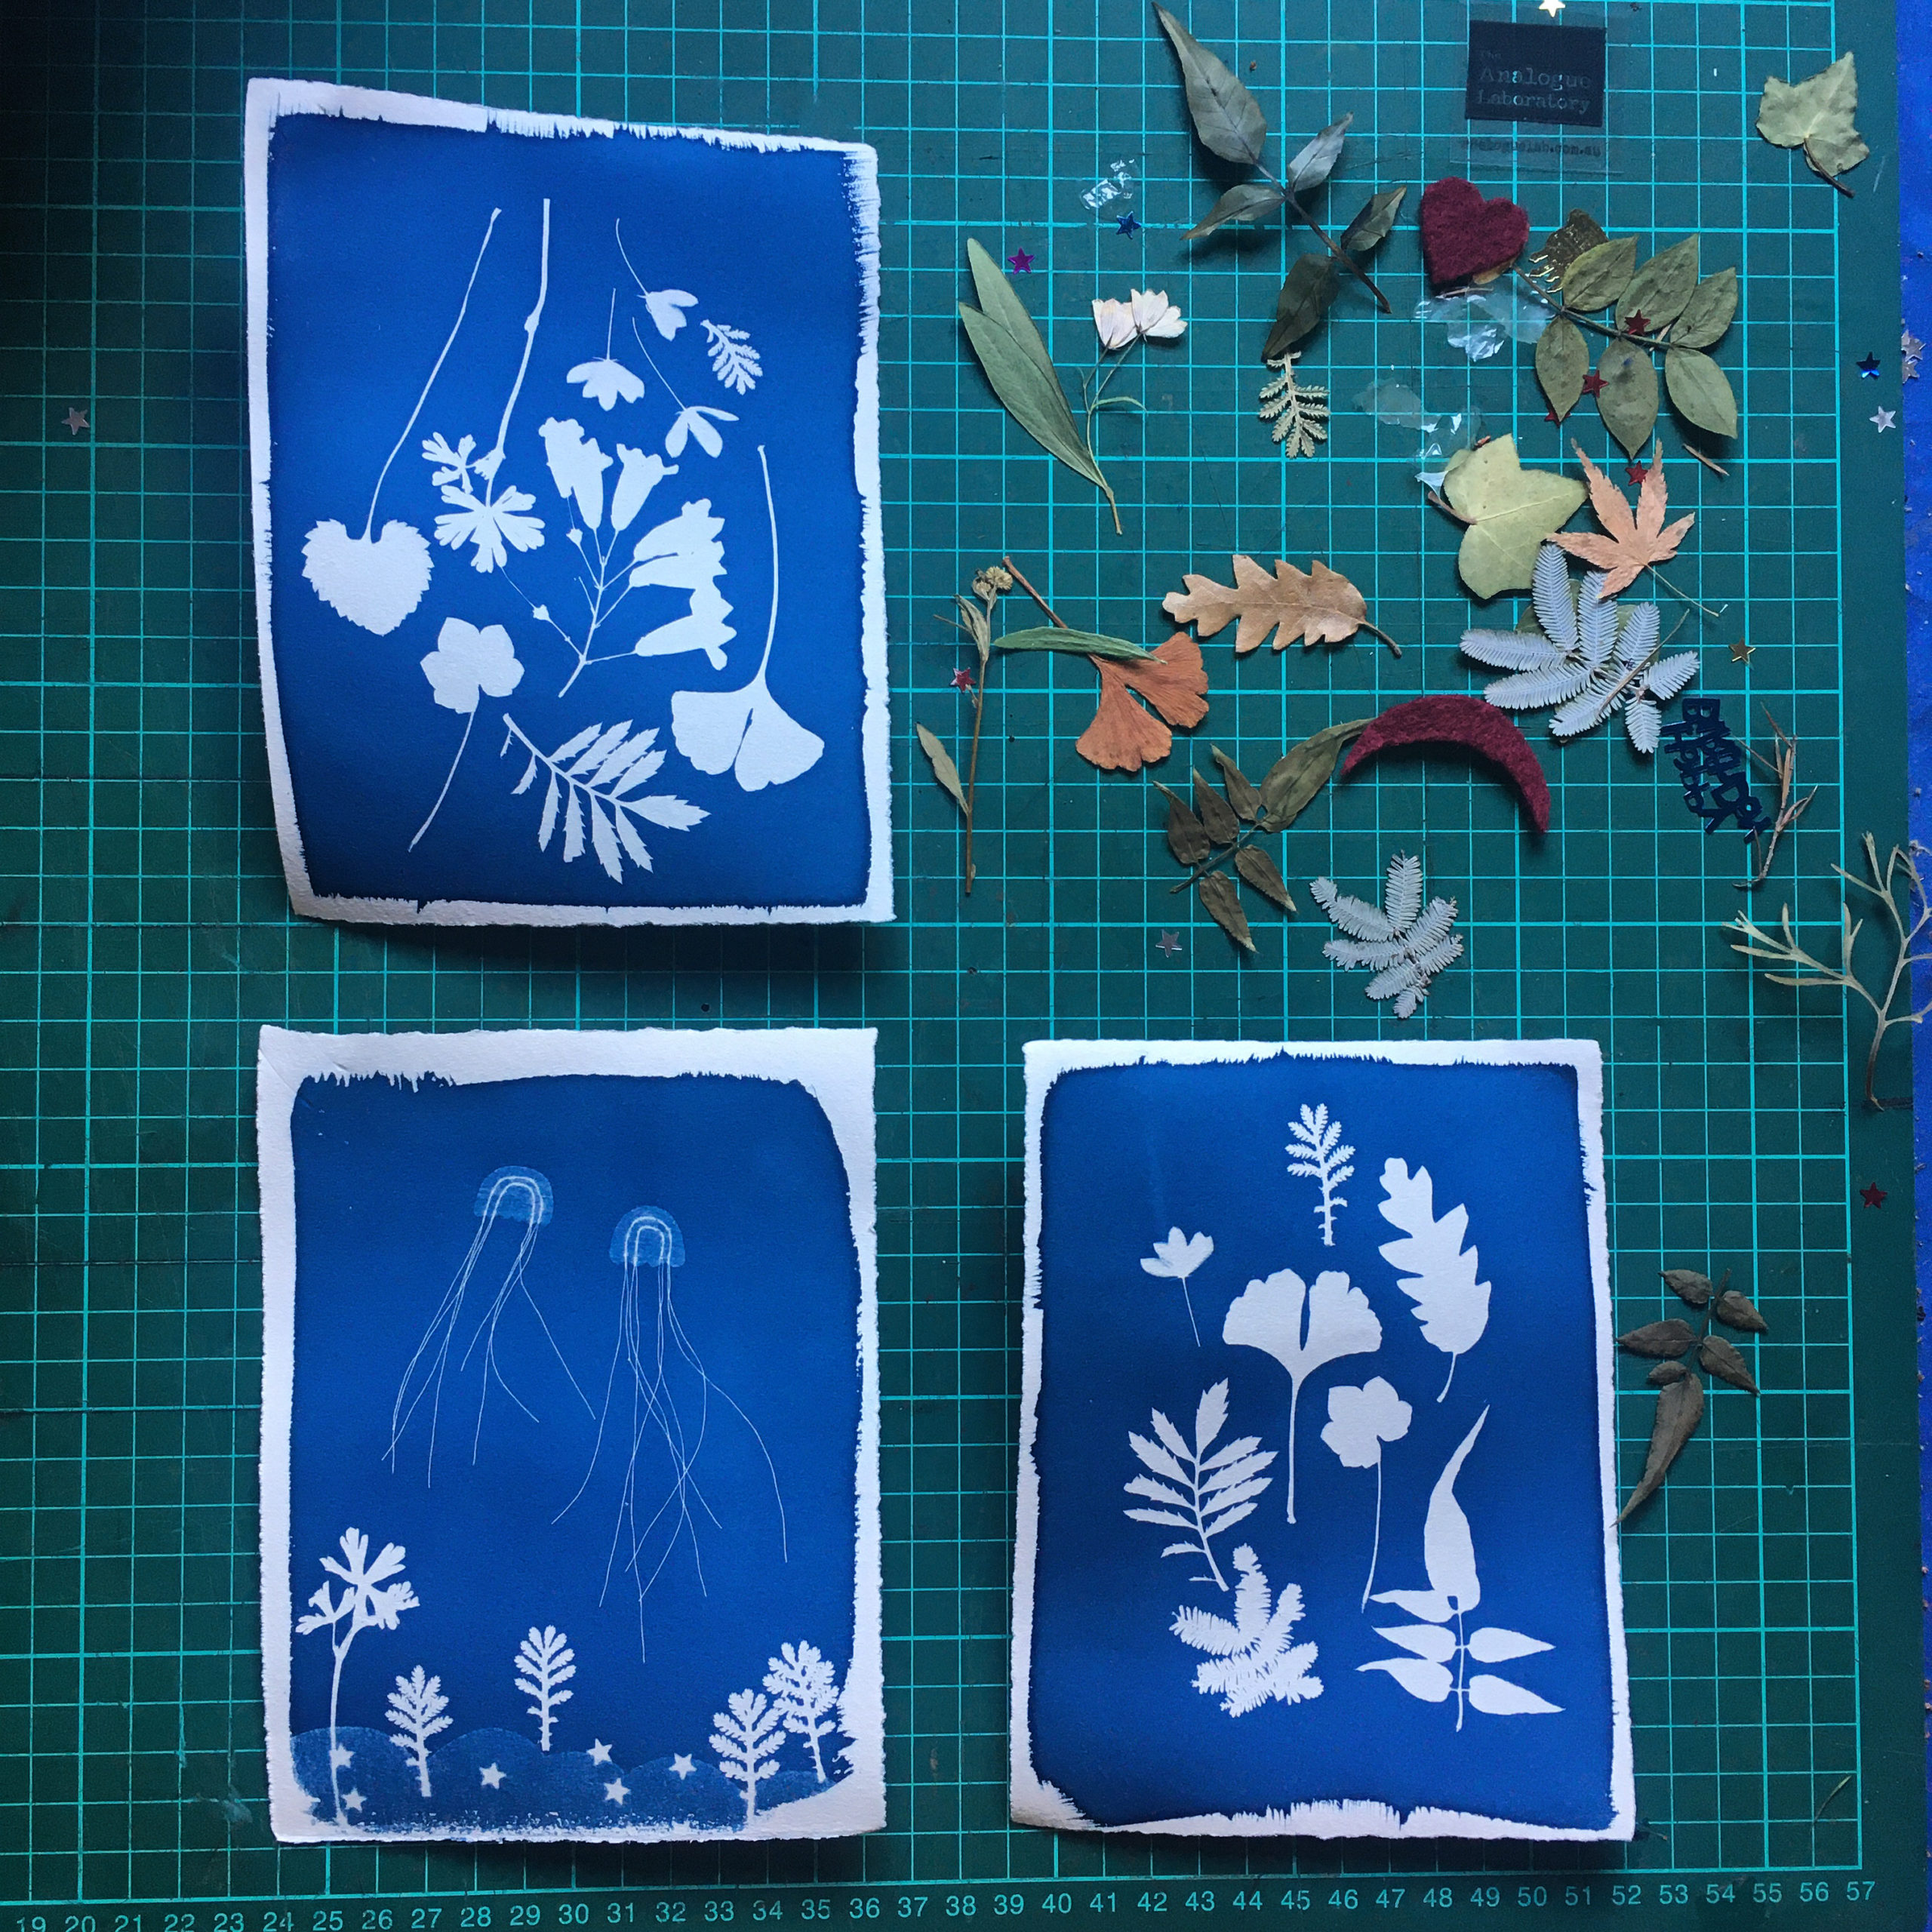 Pre-coating Cyanotype – Can it be done? – The Analogue Laboratory